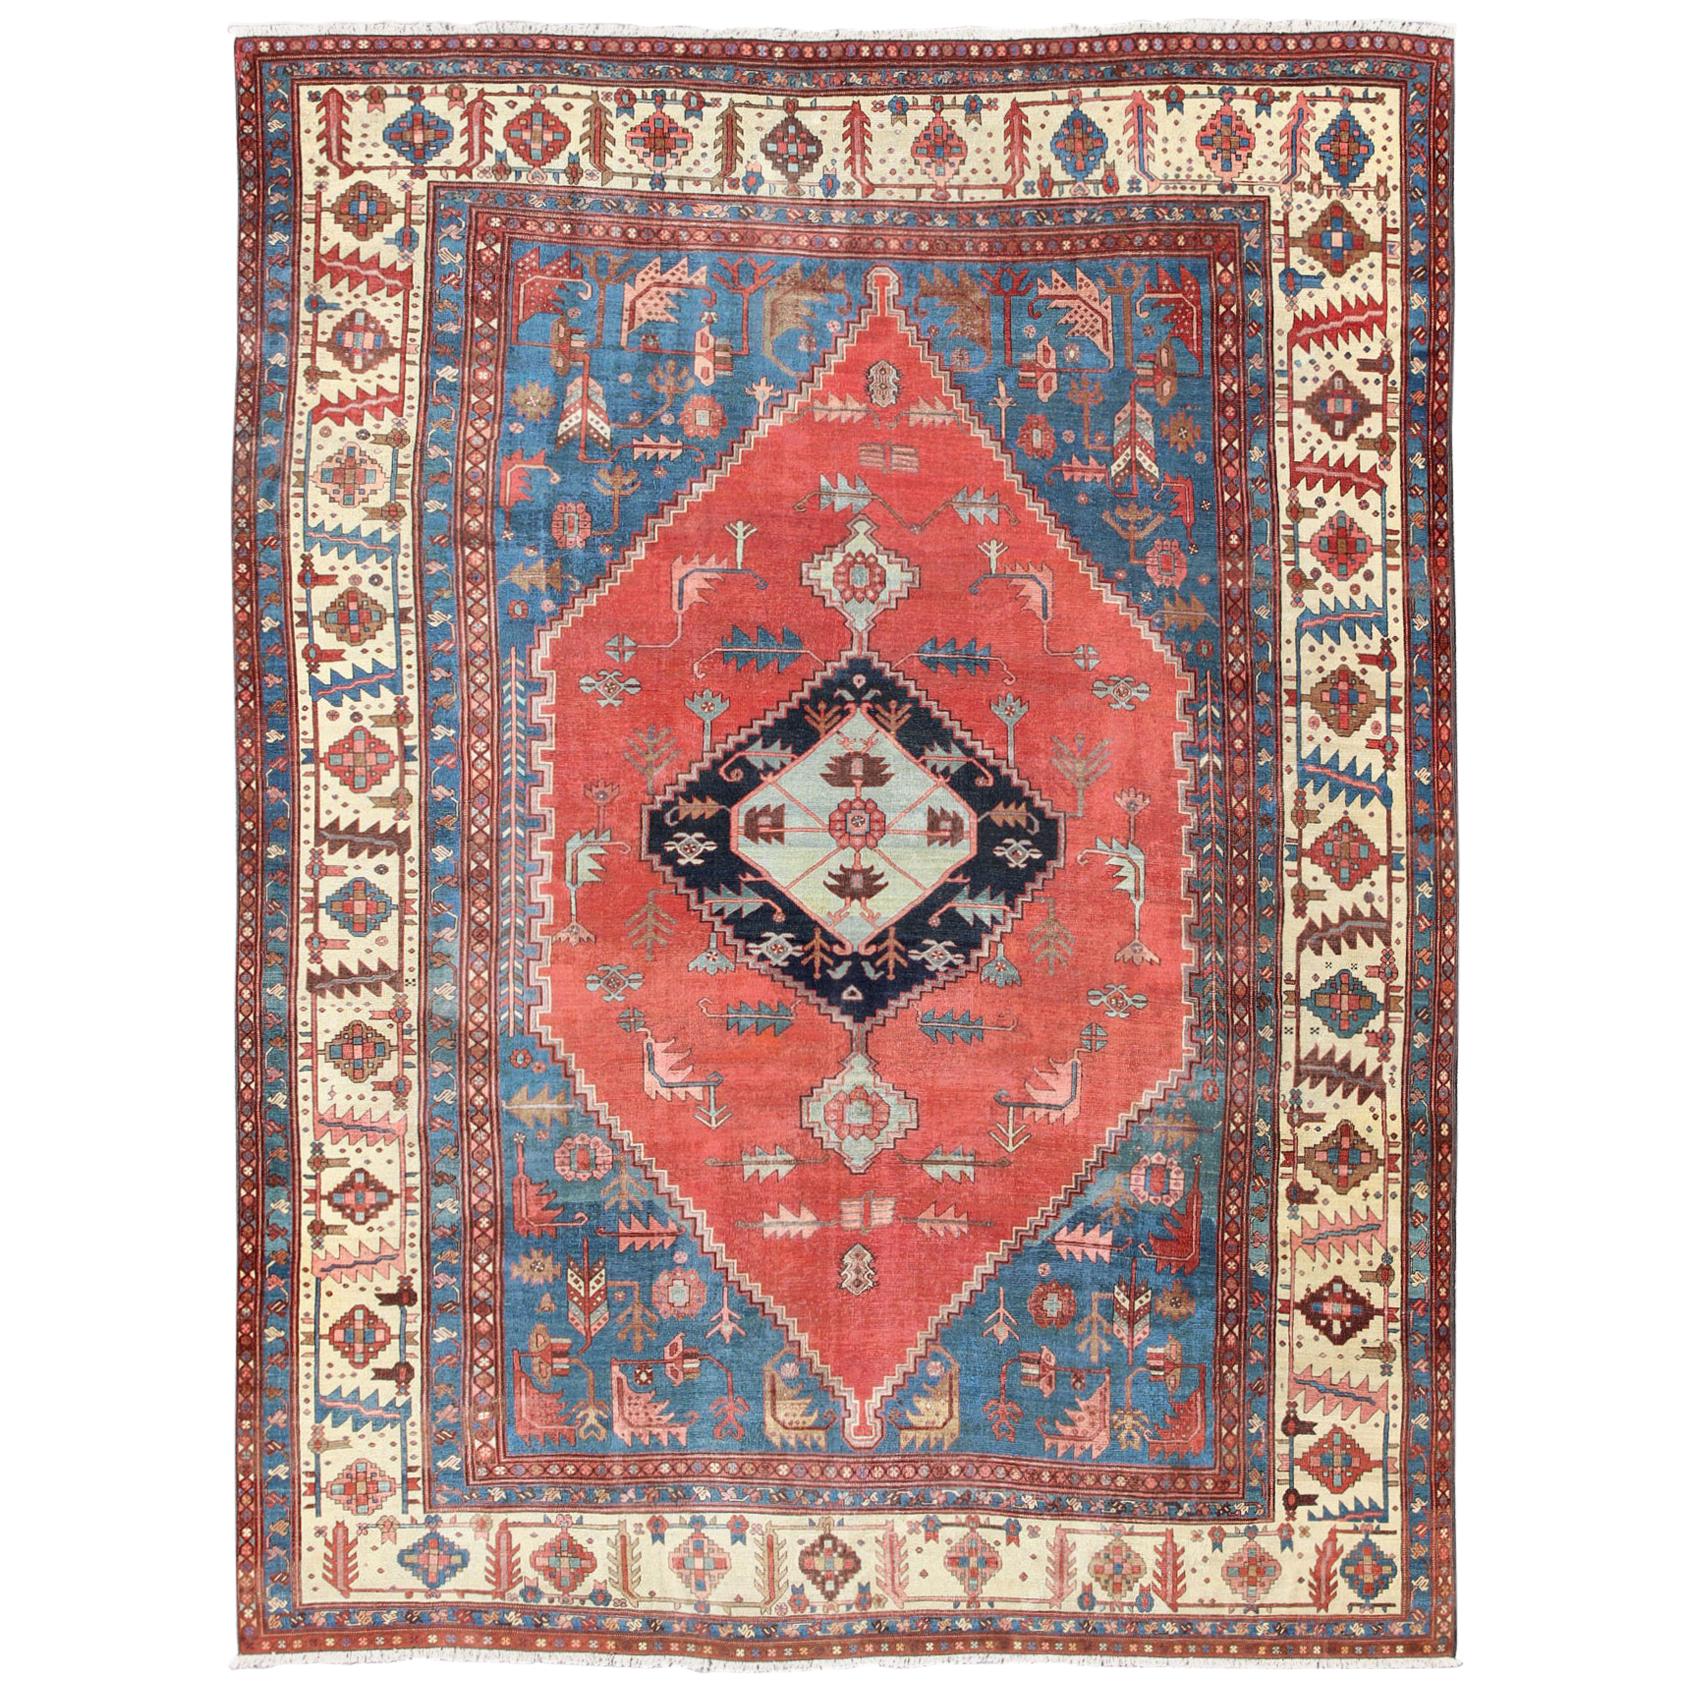 Antique Persian Large Bakshaish Serapi Rug in Brick Red, Royal Blue and Ivory For Sale